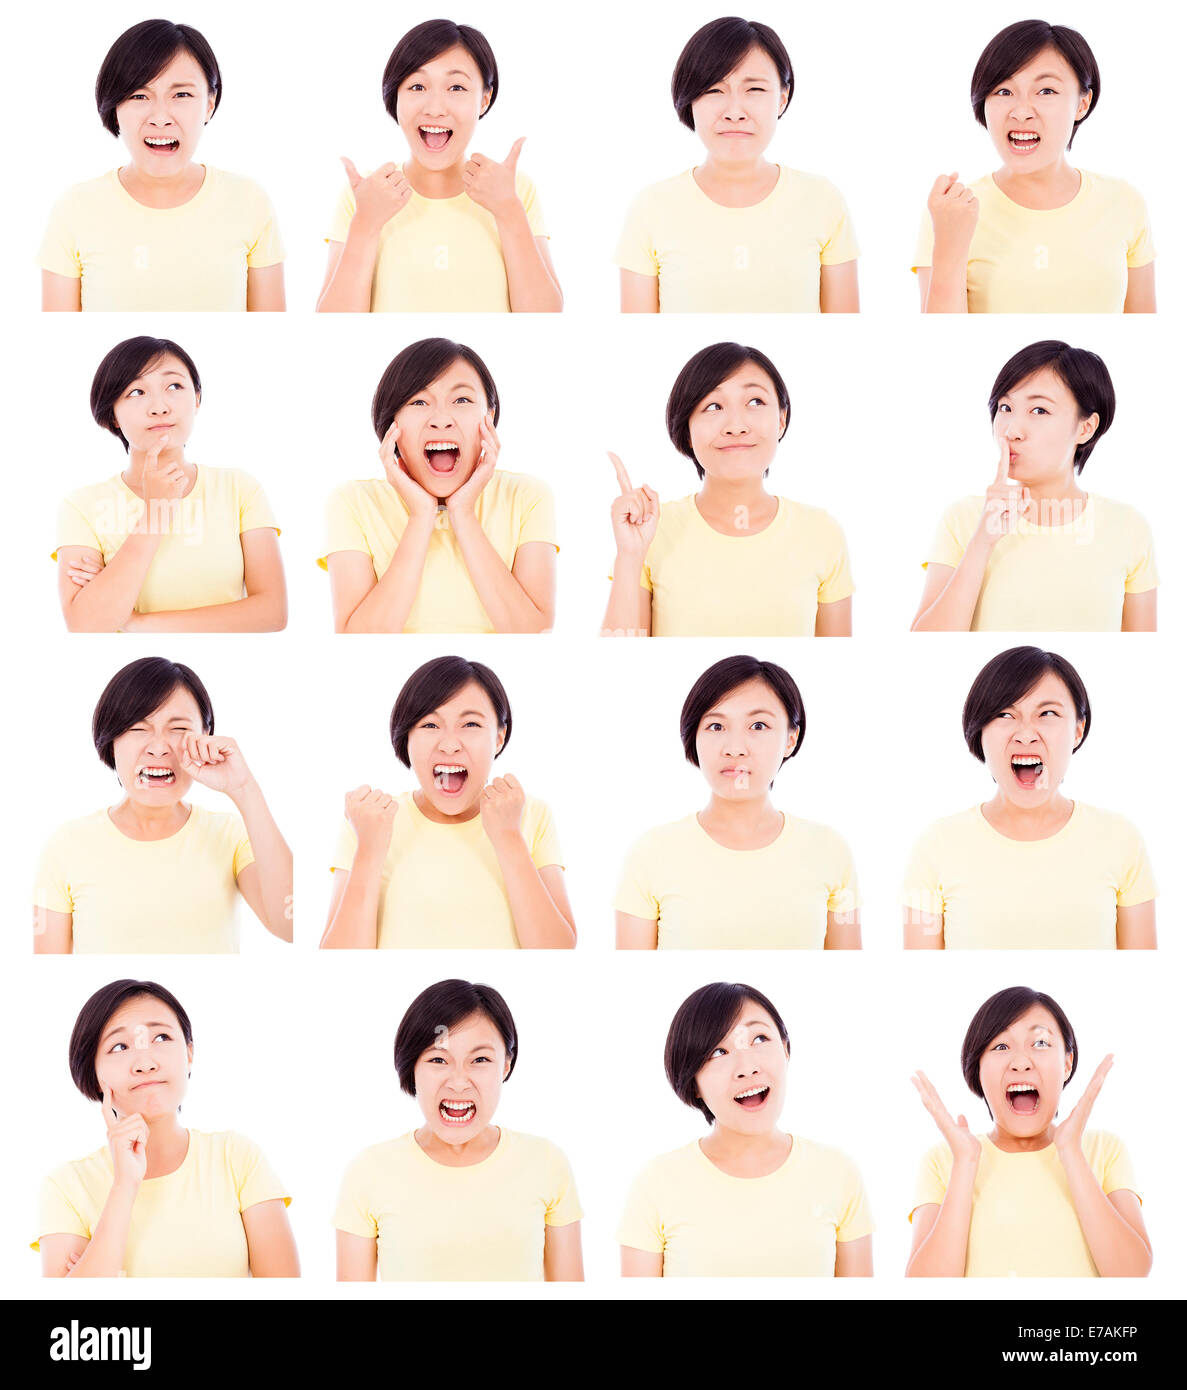 asian young woman making different facial expressions Stock Photo